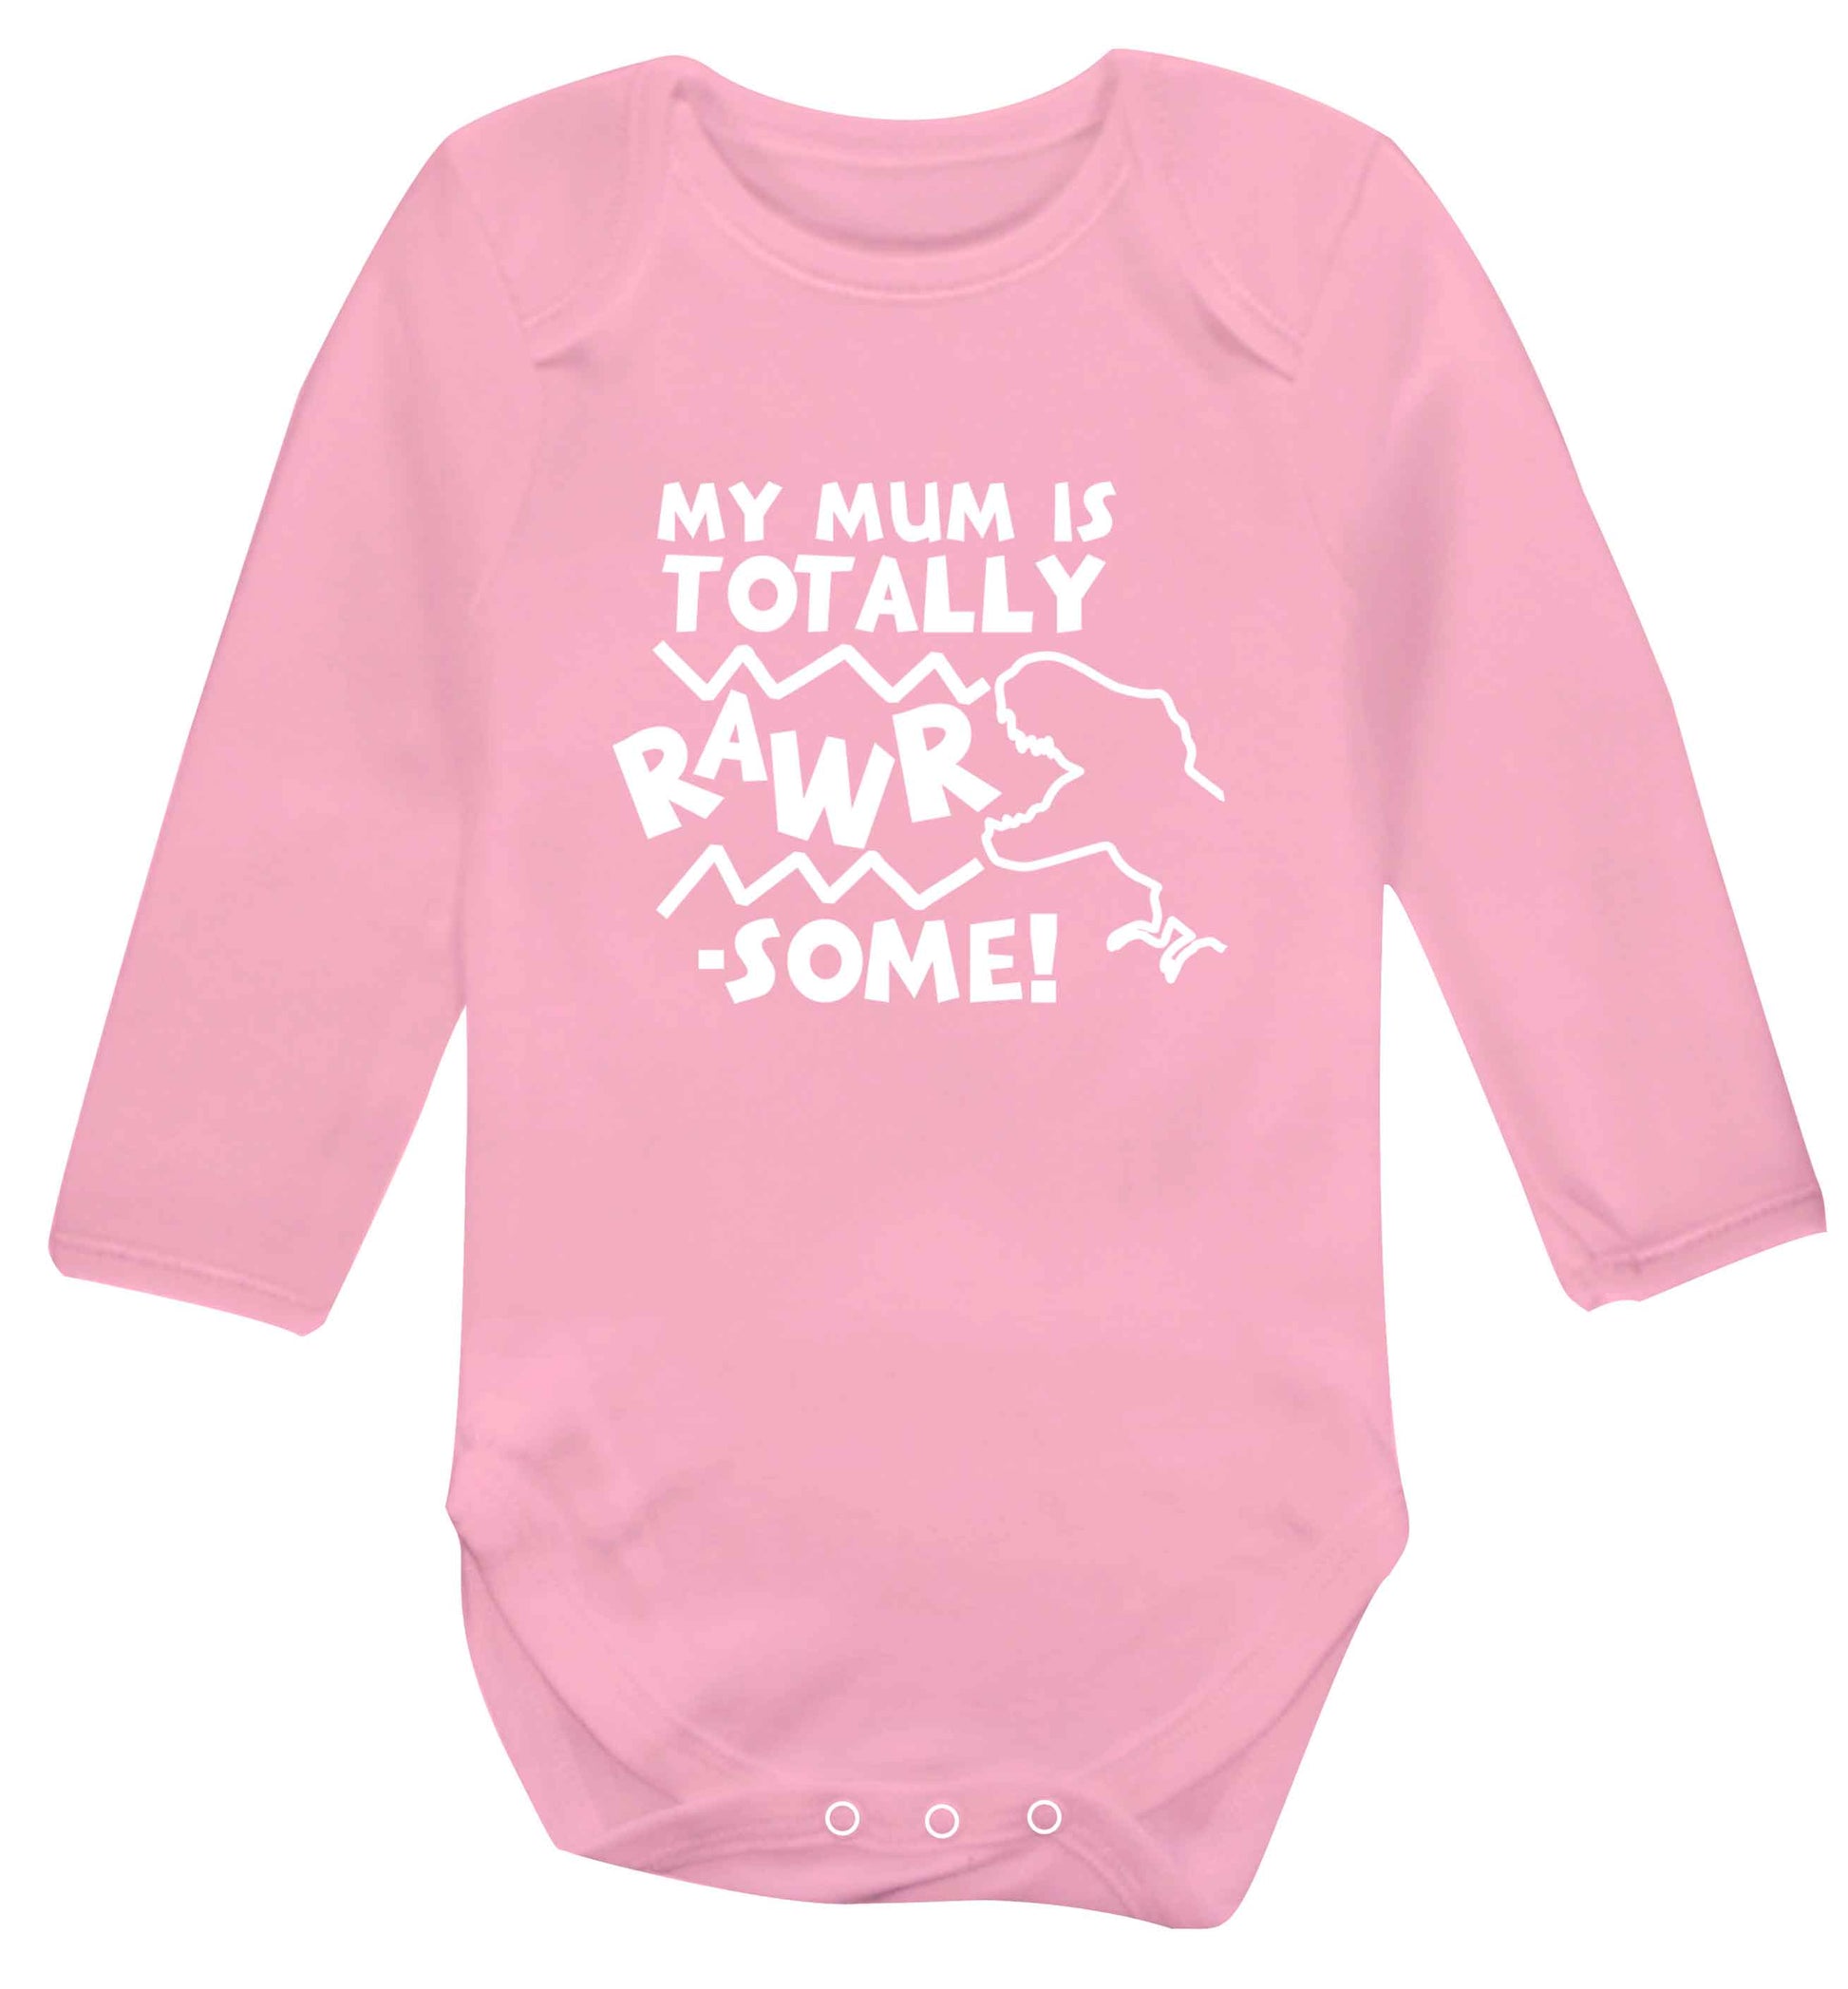 My mum is totally rawrsome baby vest long sleeved pale pink 6-12 months